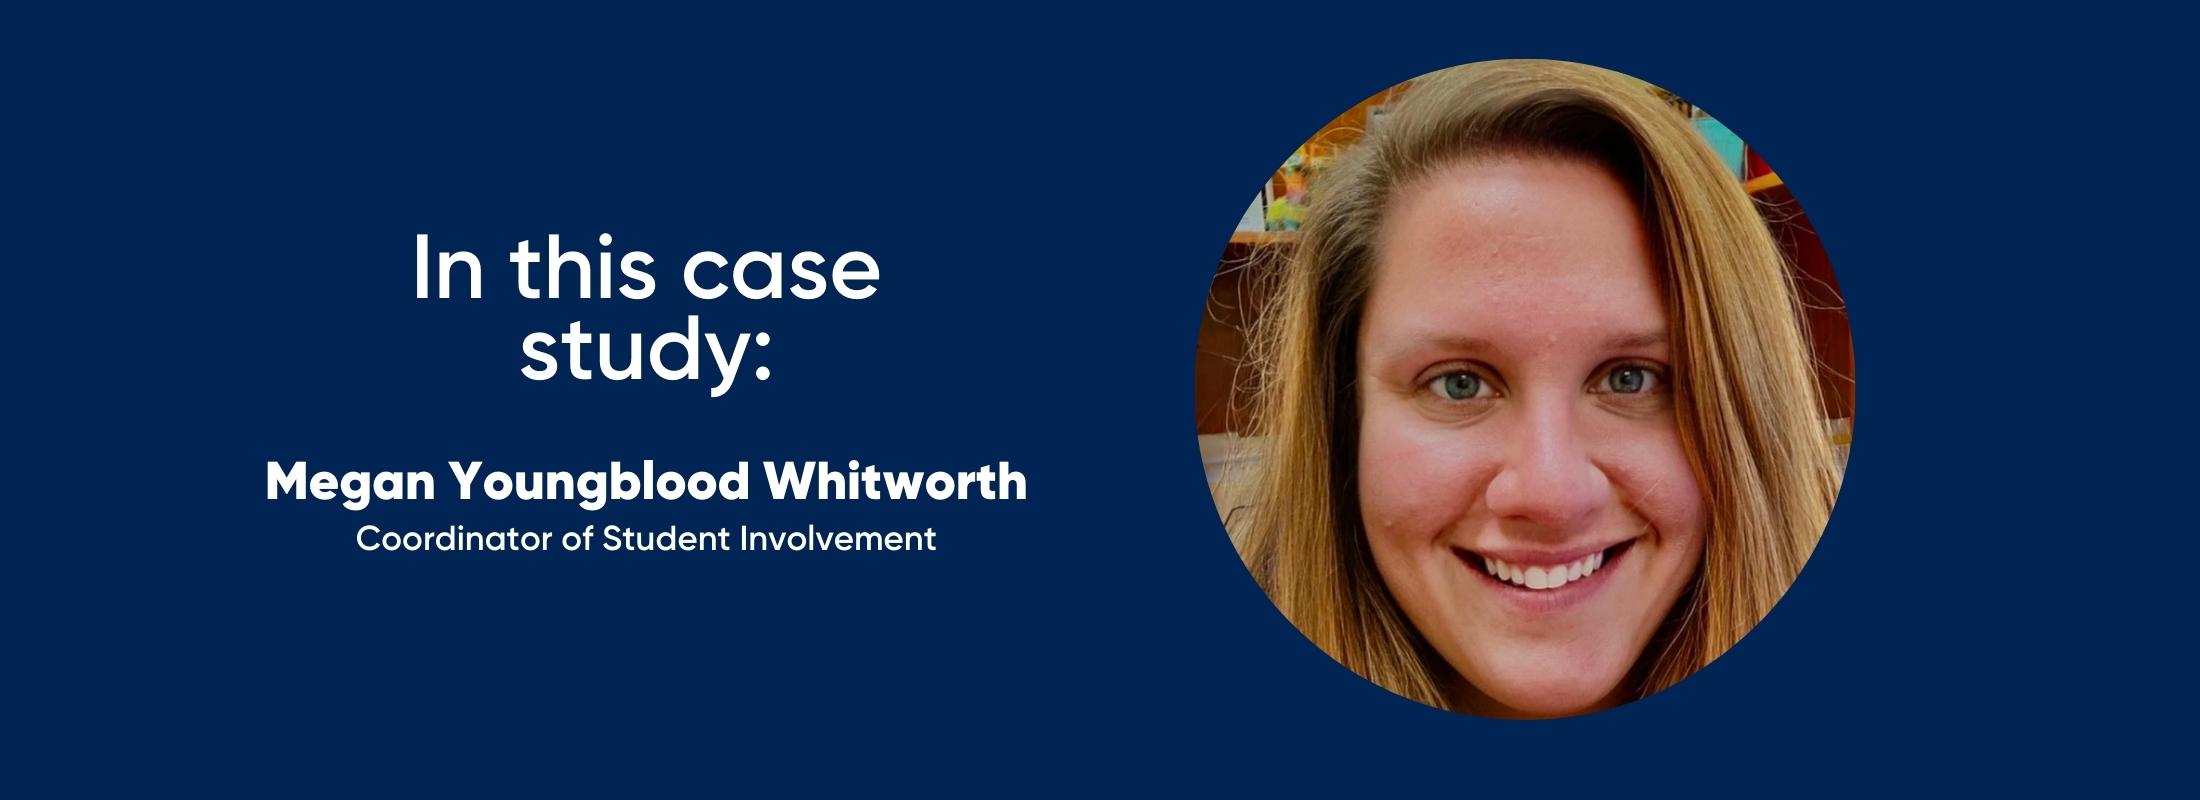 in this case study: Megan Youngblood Whitworth - Coordinator of Student Involvement